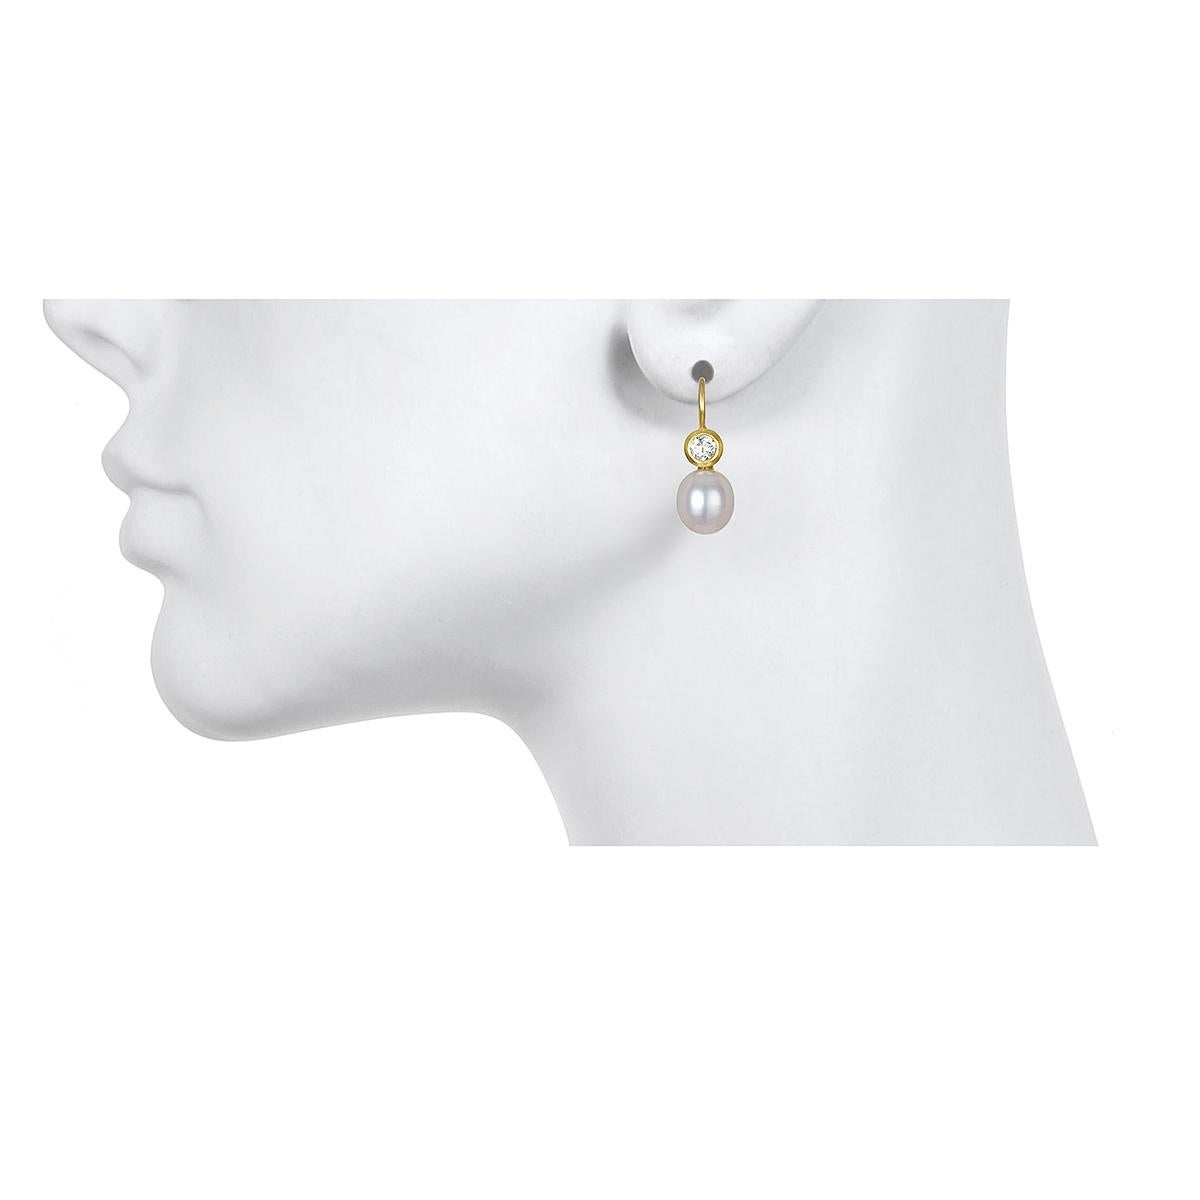 Set in 18k green gold, White Sapphire is paired with white freshwater pearls to create a pair of modern-day classic drop earrings.  Matte-finished.
Casual or corporate, the clean design is flattering and simply beautiful!  French ear wires.  

Model